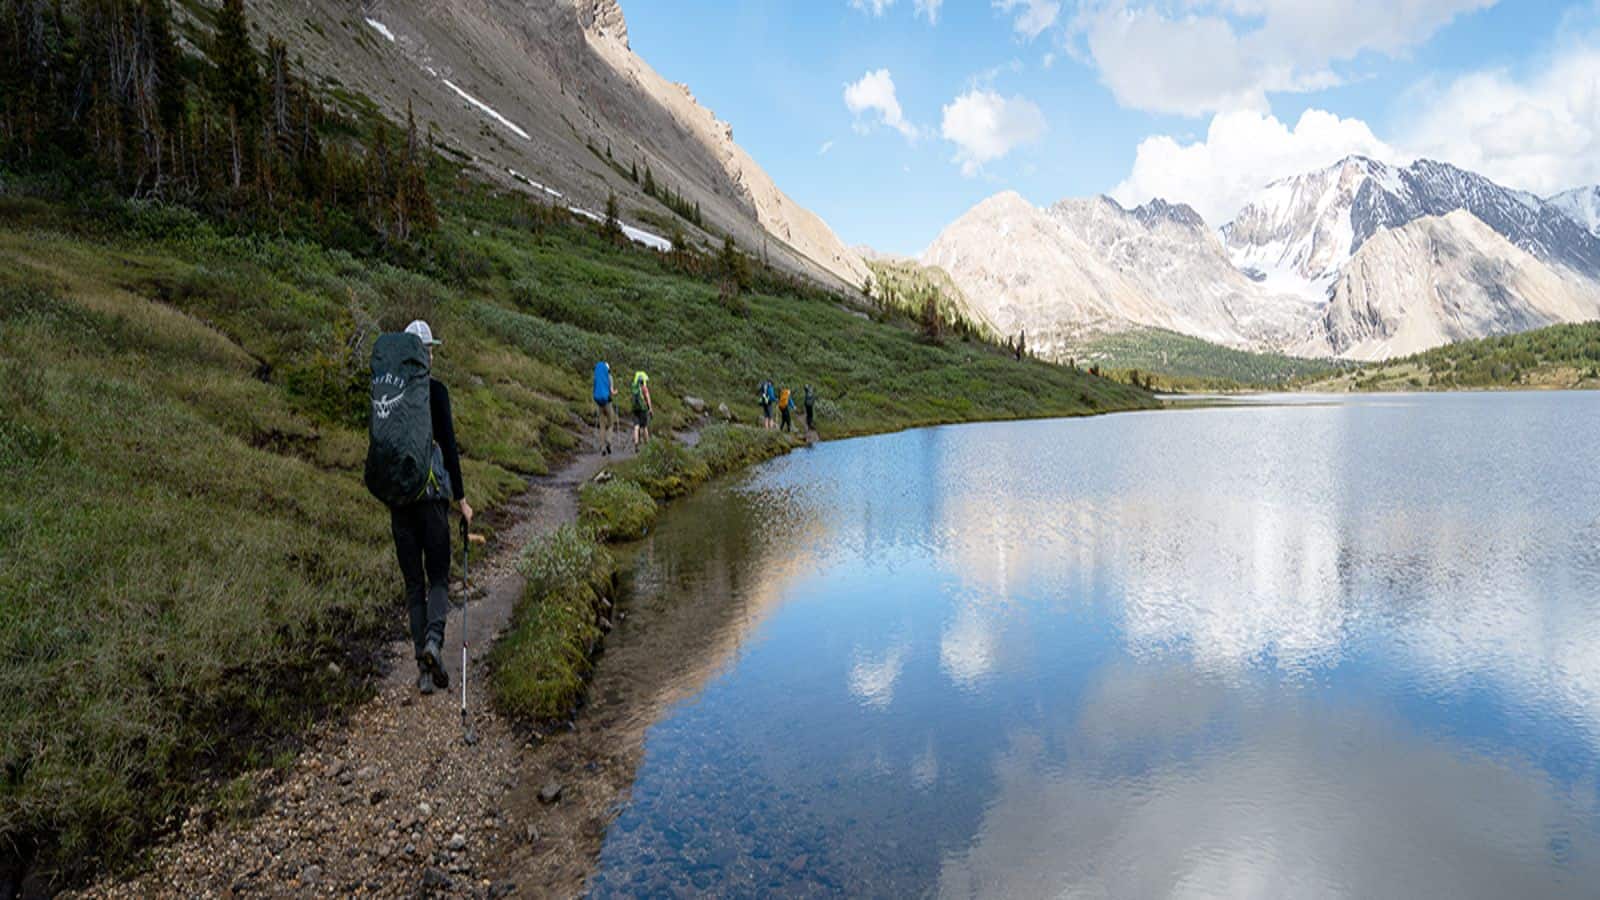 Banff alpine backpacking essentials no one told you about